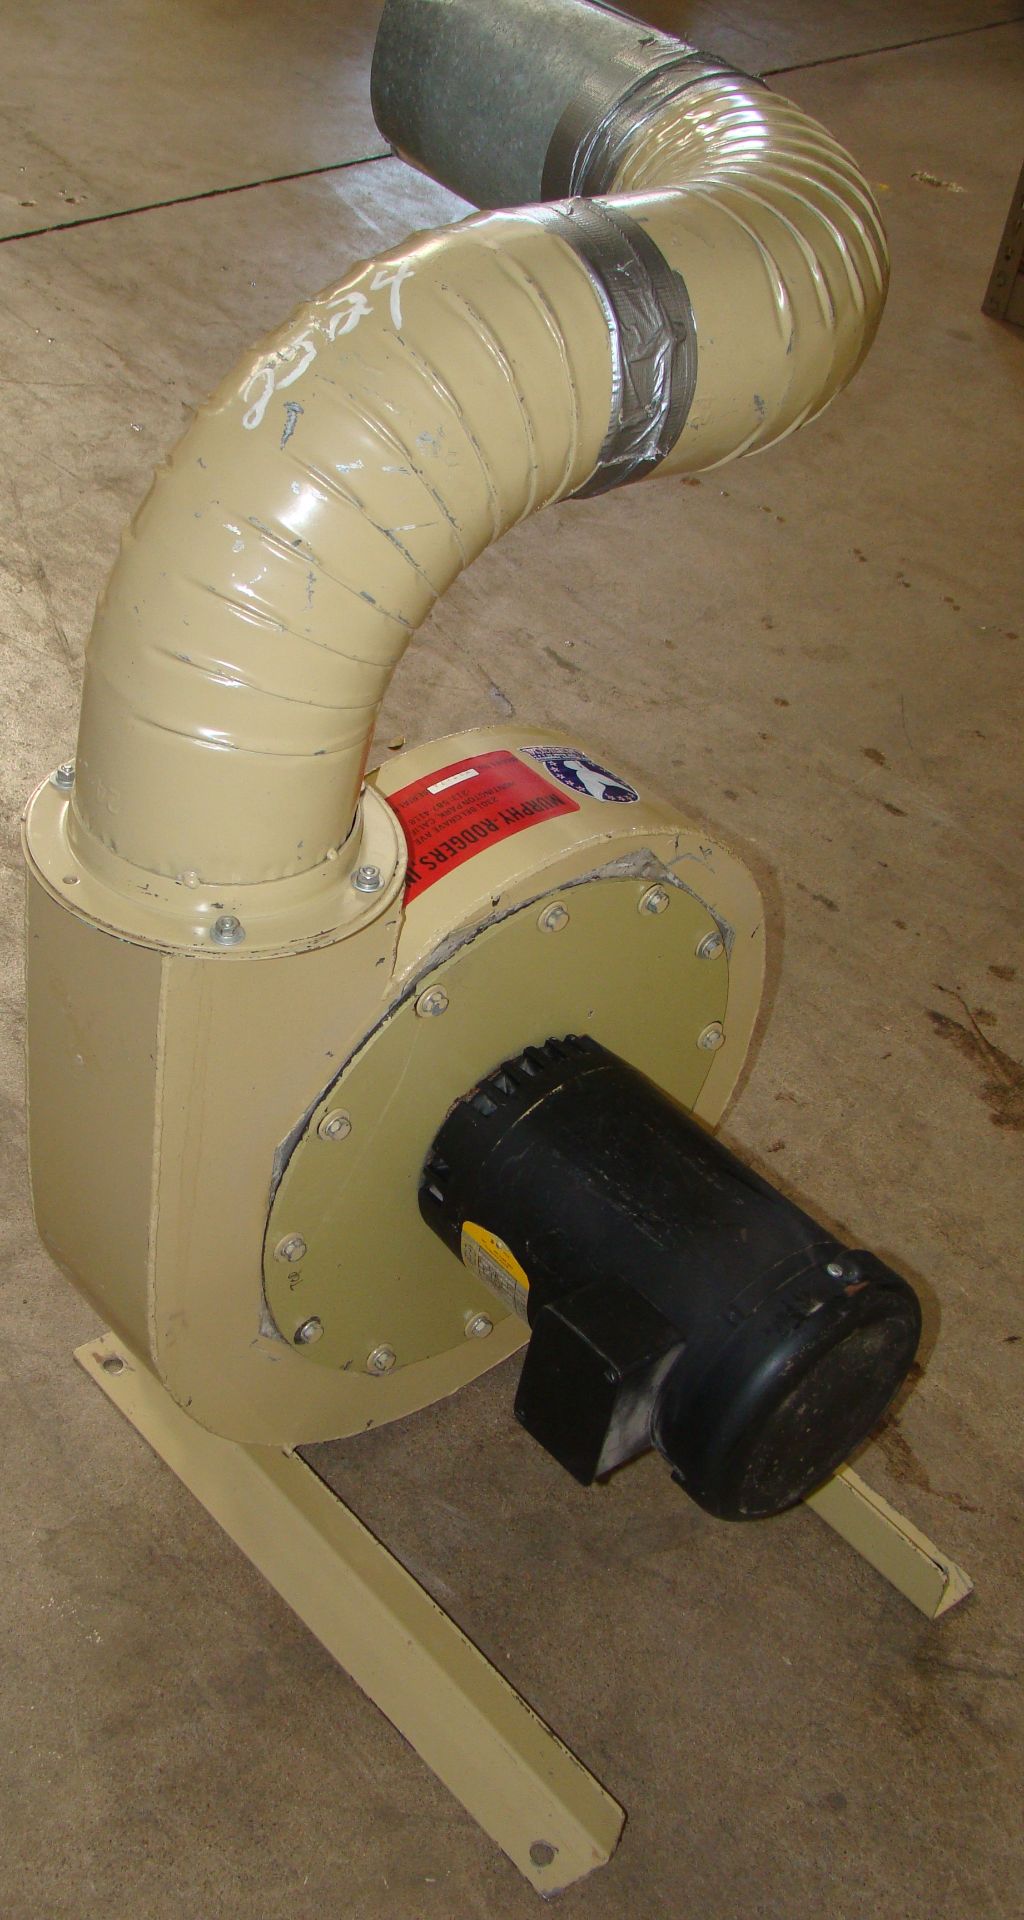 Murphy-Rodgers Inc Single Dust Collector Model#MRT/7A 3 HP 208-230/460 Volt 3PH - Image 2 of 5